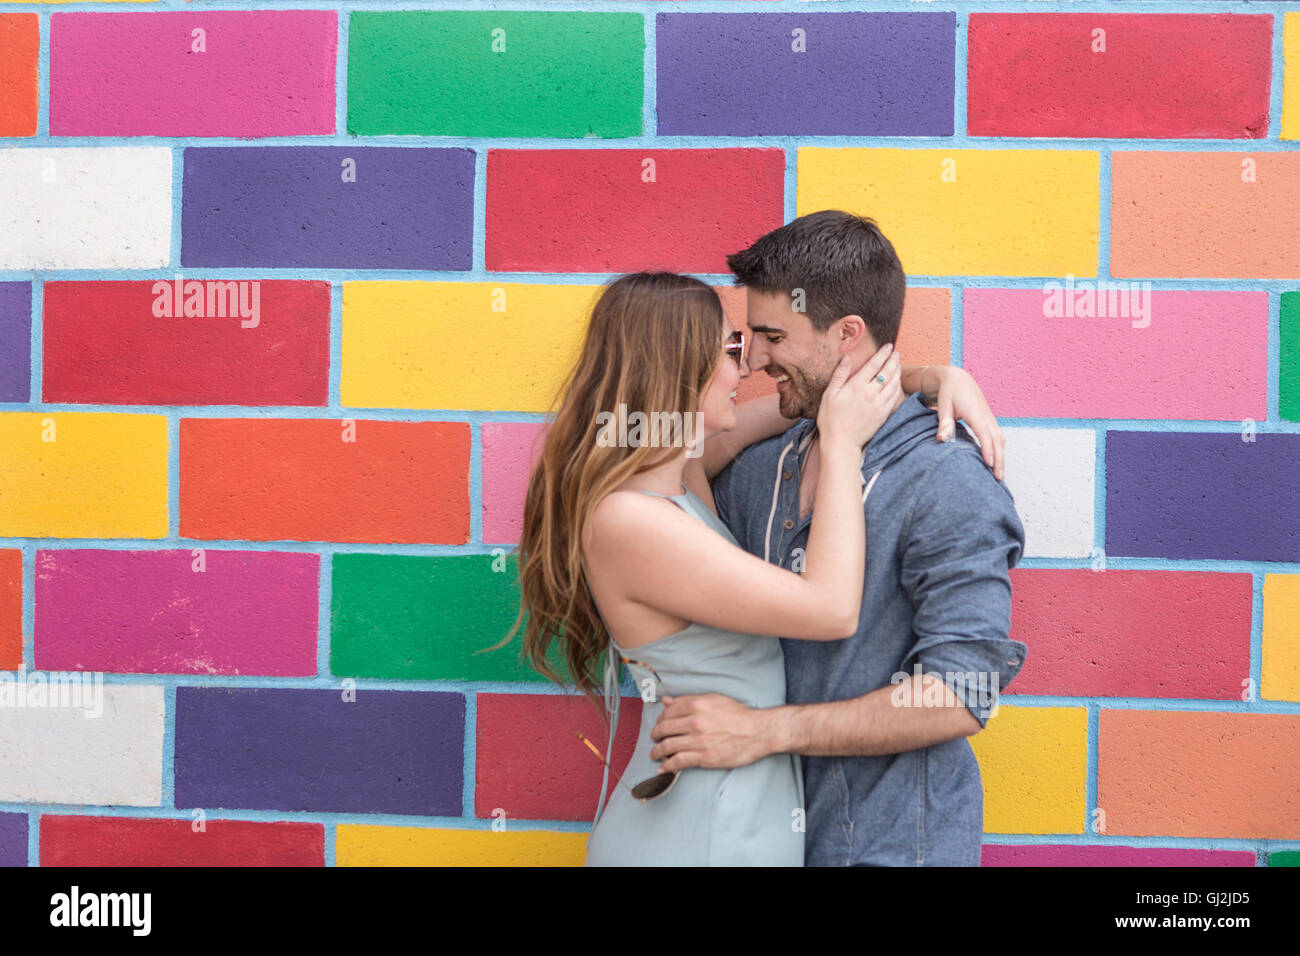 Couple in front of colorful mur carrelé, Coney Island, Brooklyn, New York, USA Banque D'Images